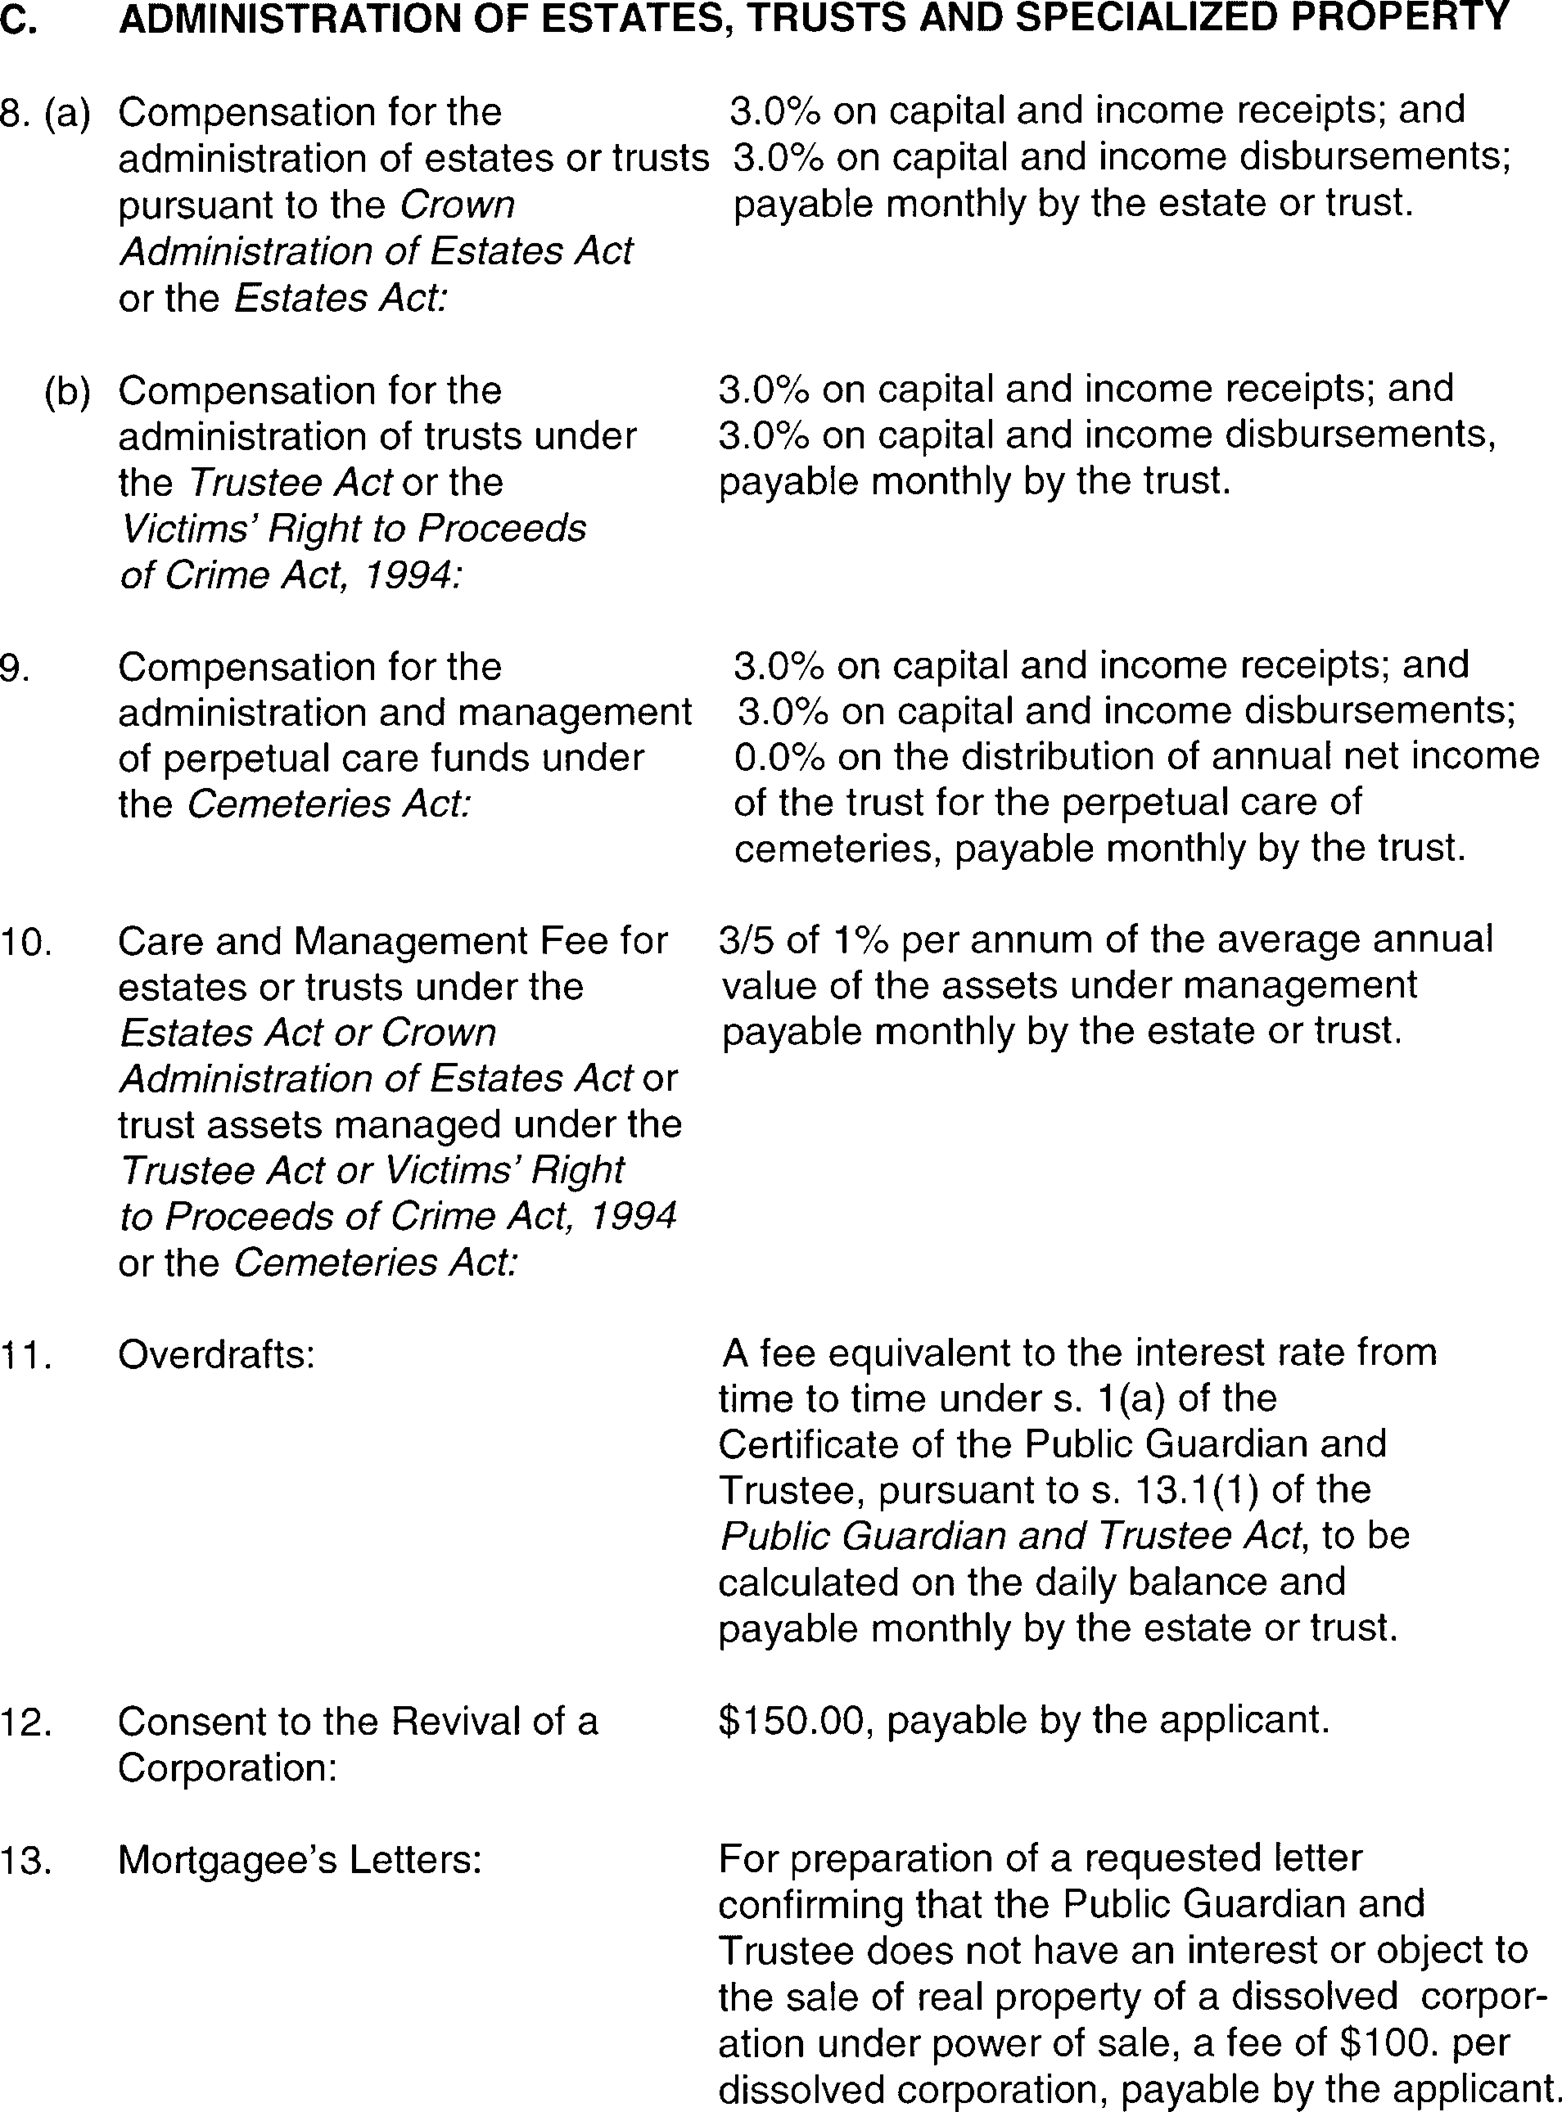 Photocopy of Fees of the Public Guardian and Trustee (pursuant to s. 8(2) of the Public Guardian and Trustee Act, R.S.O 1990, c. P.51, as amended)